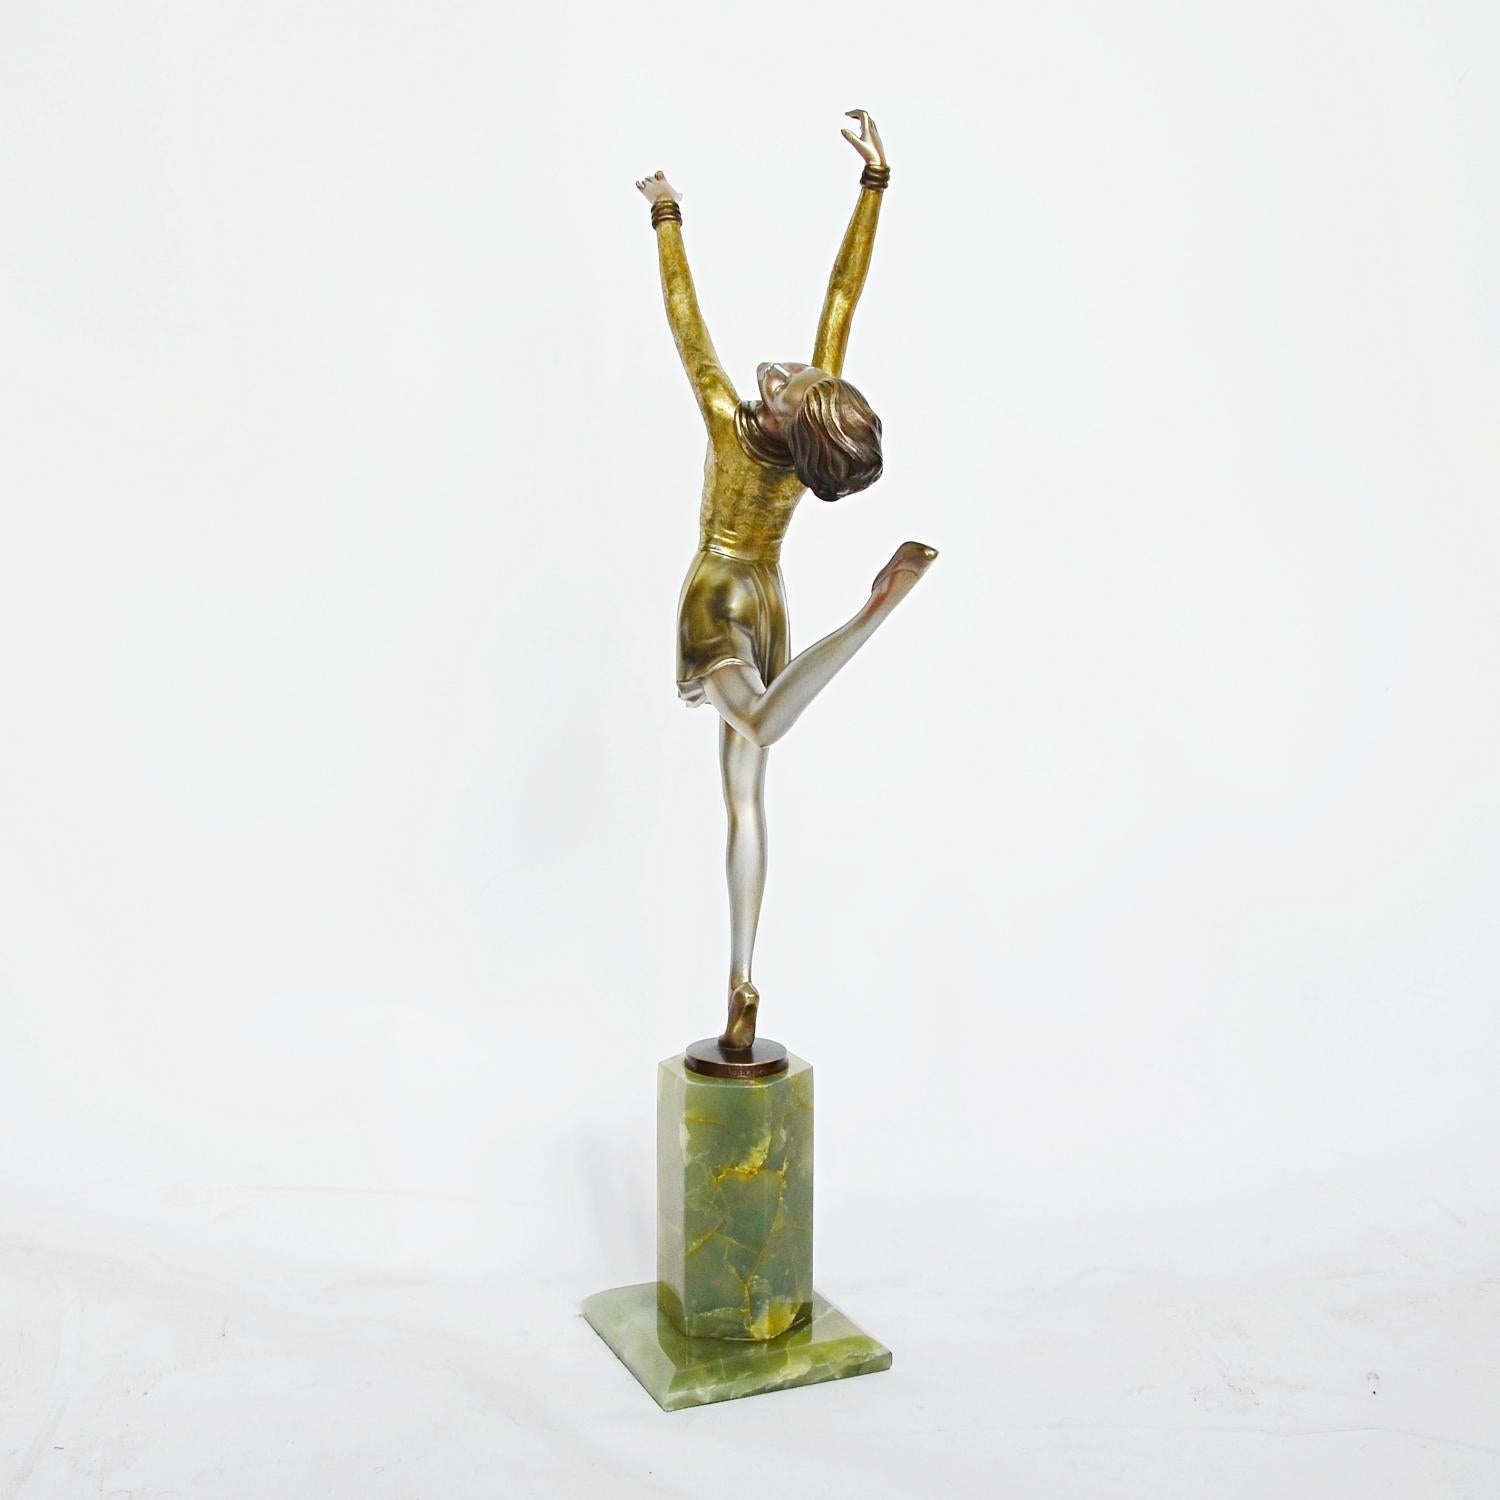 A large Art Deco, cold painted silvered bronze figure by Josef Lorenzl (1892-1950). A dancing woman in stylized pose set over a green onyx plinth. Original color and patination. Signed Lorenzl to bronze

Excellent original